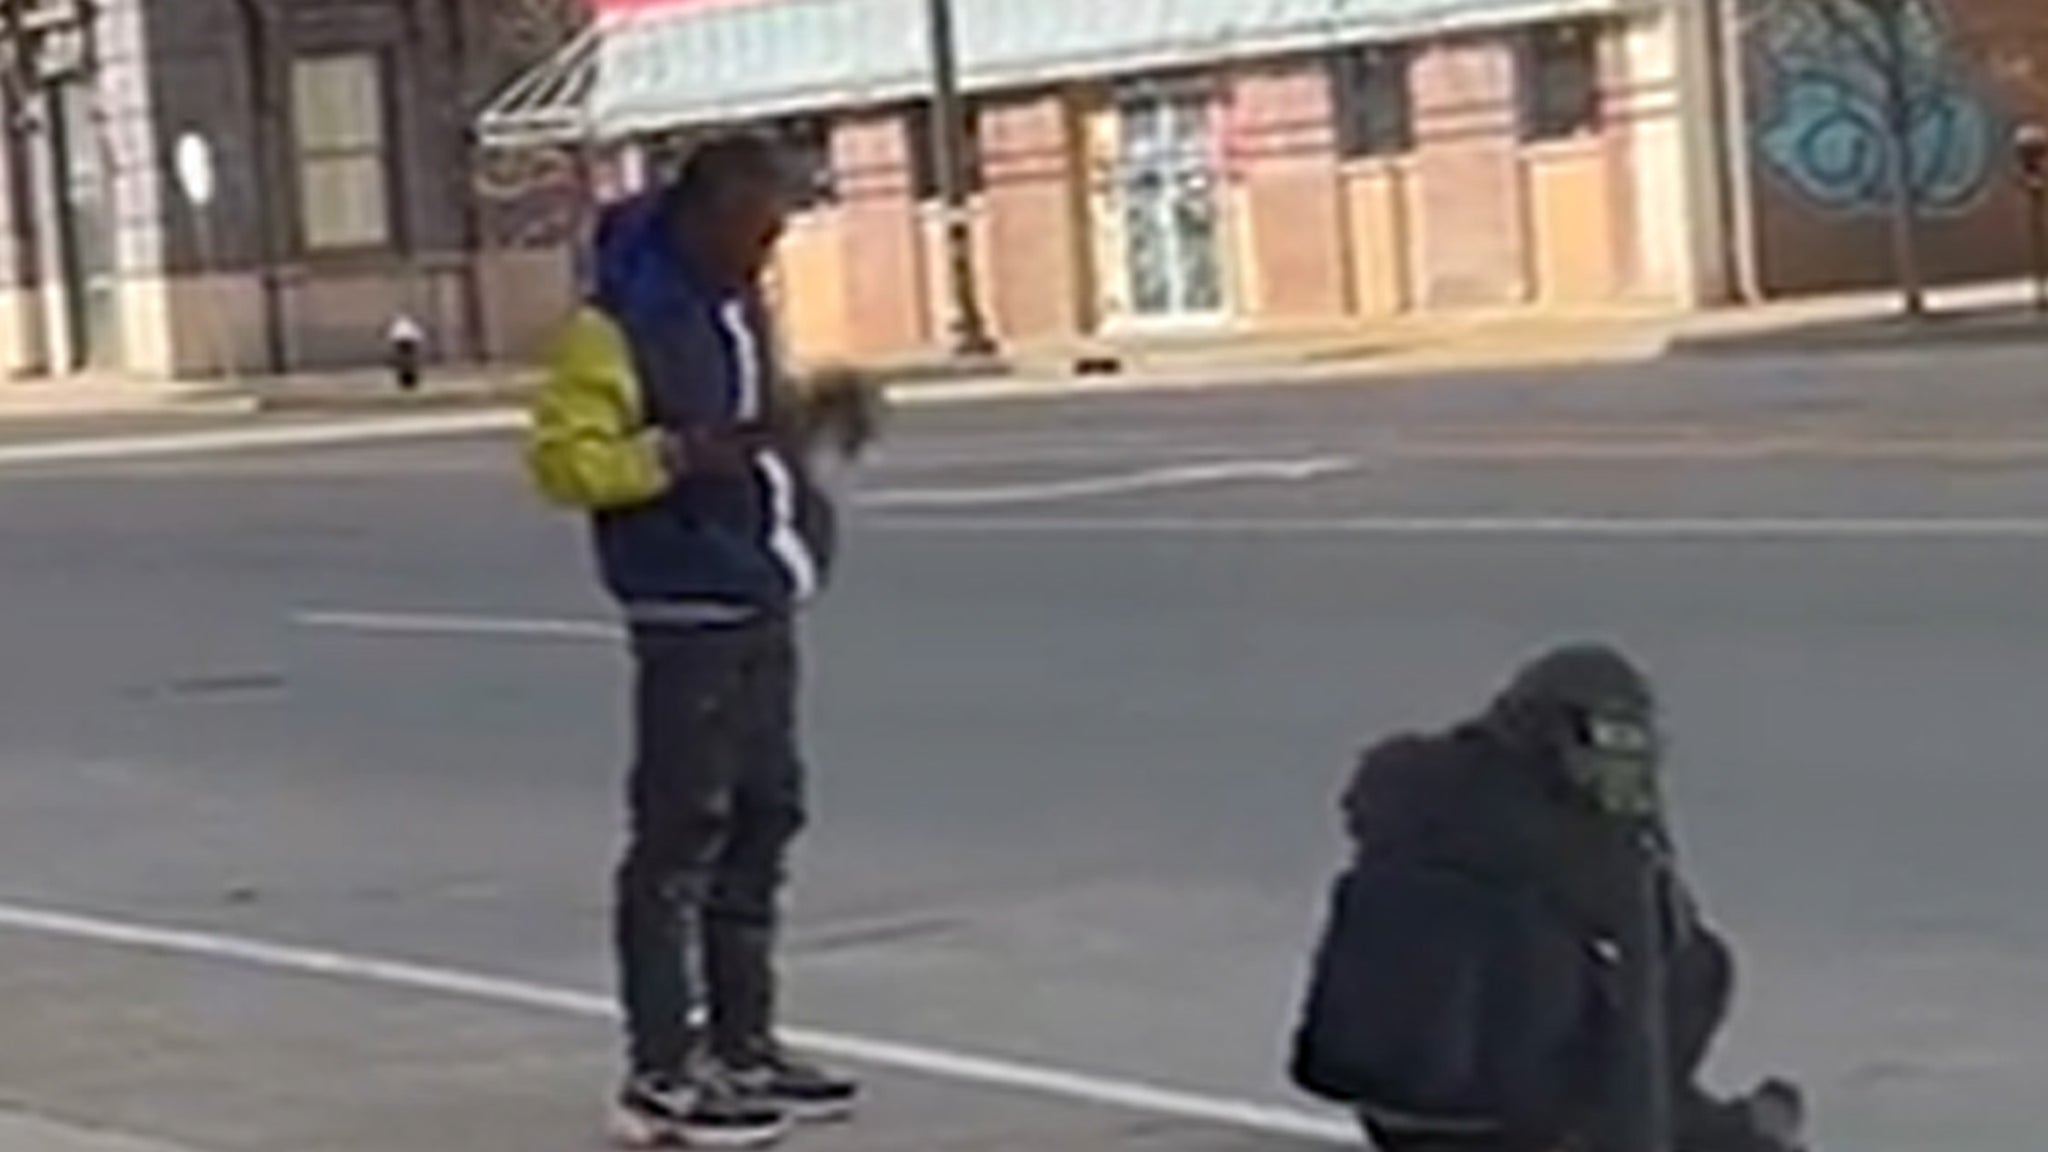 Shocking Video Shows Moment Gunman Executes Homeless Person